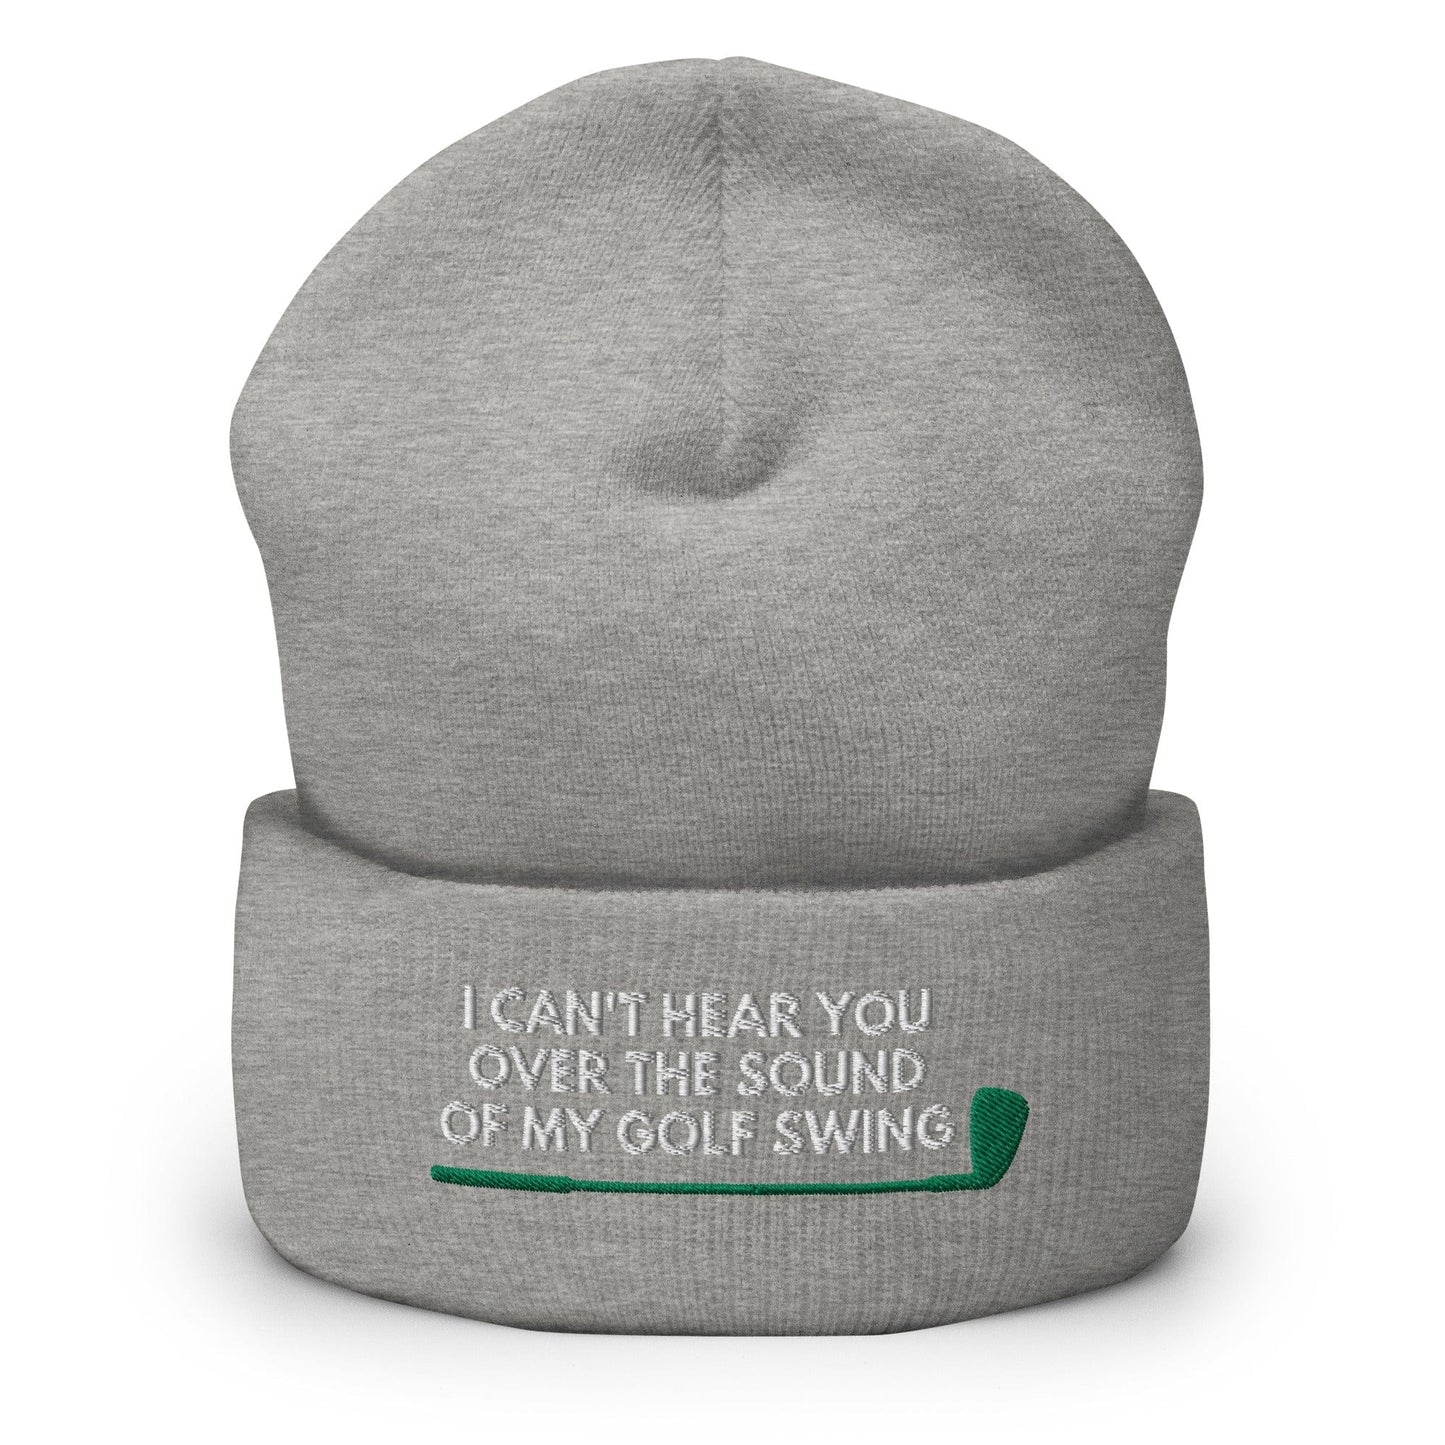 Funny Golfer Gifts  Beanie Heather Grey I Cant Hear You Over The Sound Of My Golf Swing Hat Beanie